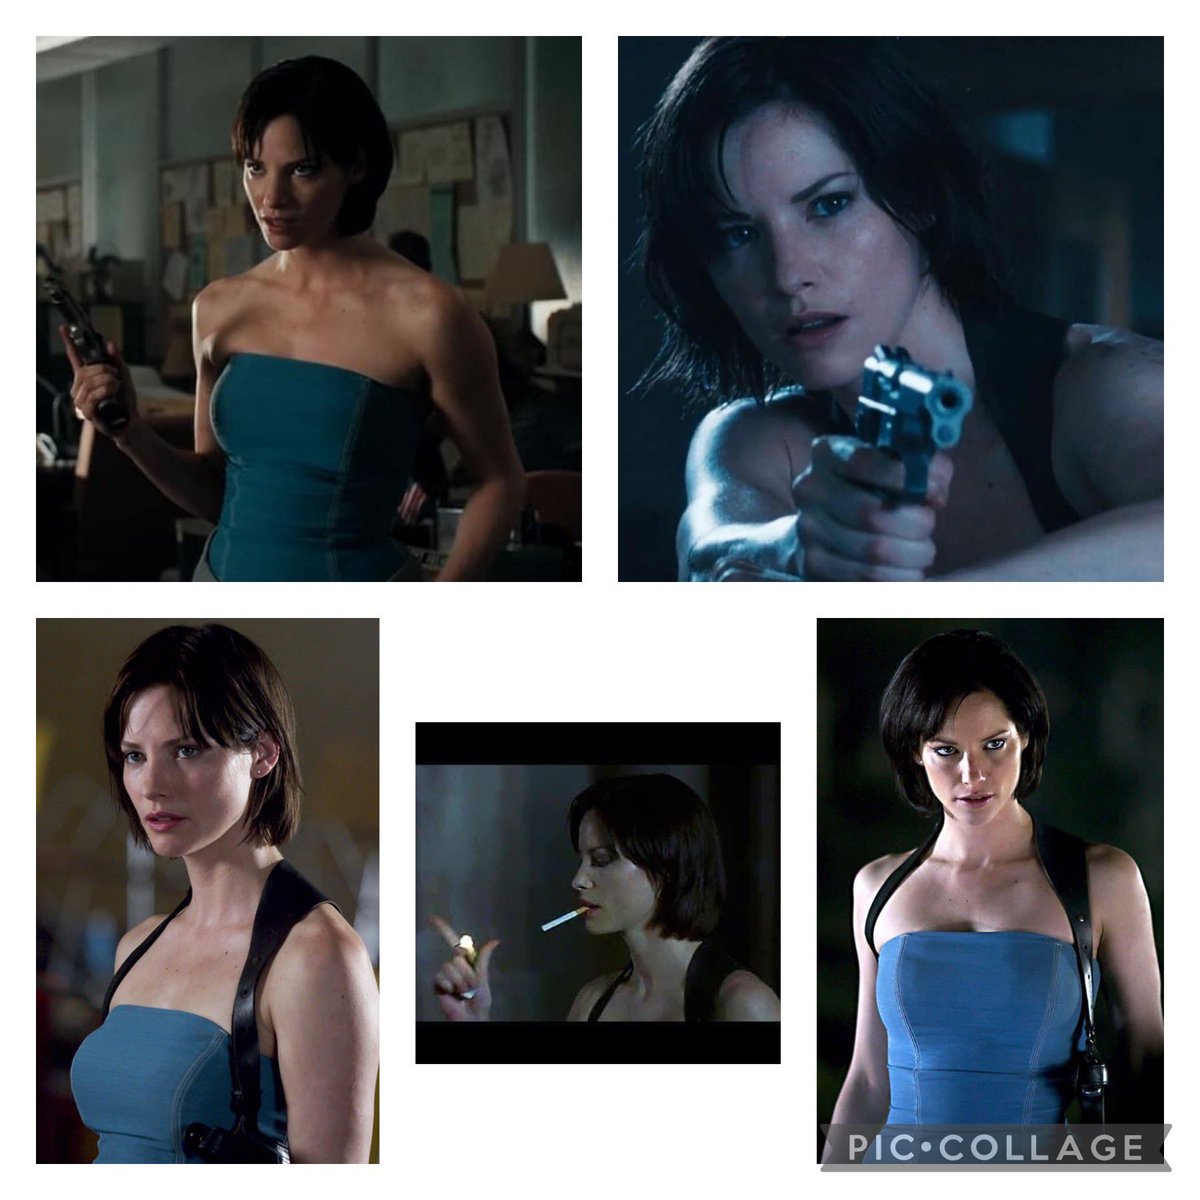 Sienna Guillory as Jill Valentine in Resident Evil: Apocalypse (2004) 😍 #siennaguillory #jillvalentine #residentevilapocalypse #beautiful